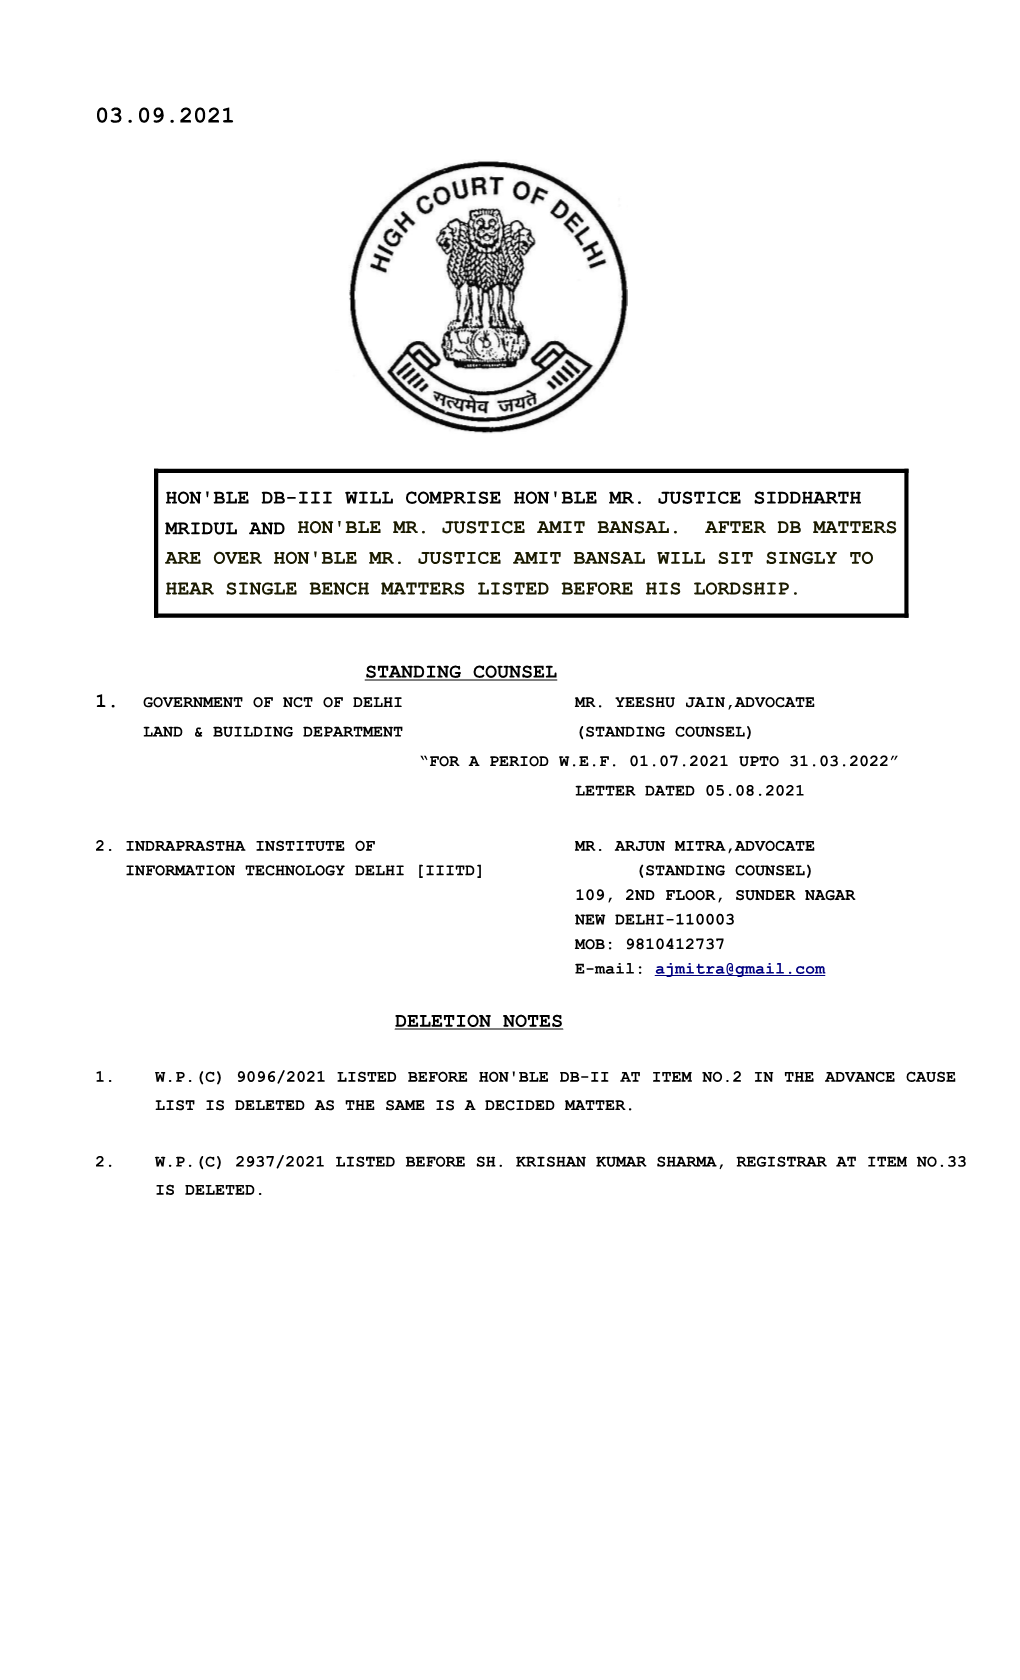 Standing Counsel Deletion Notes Hon'ble Db-Iii Will